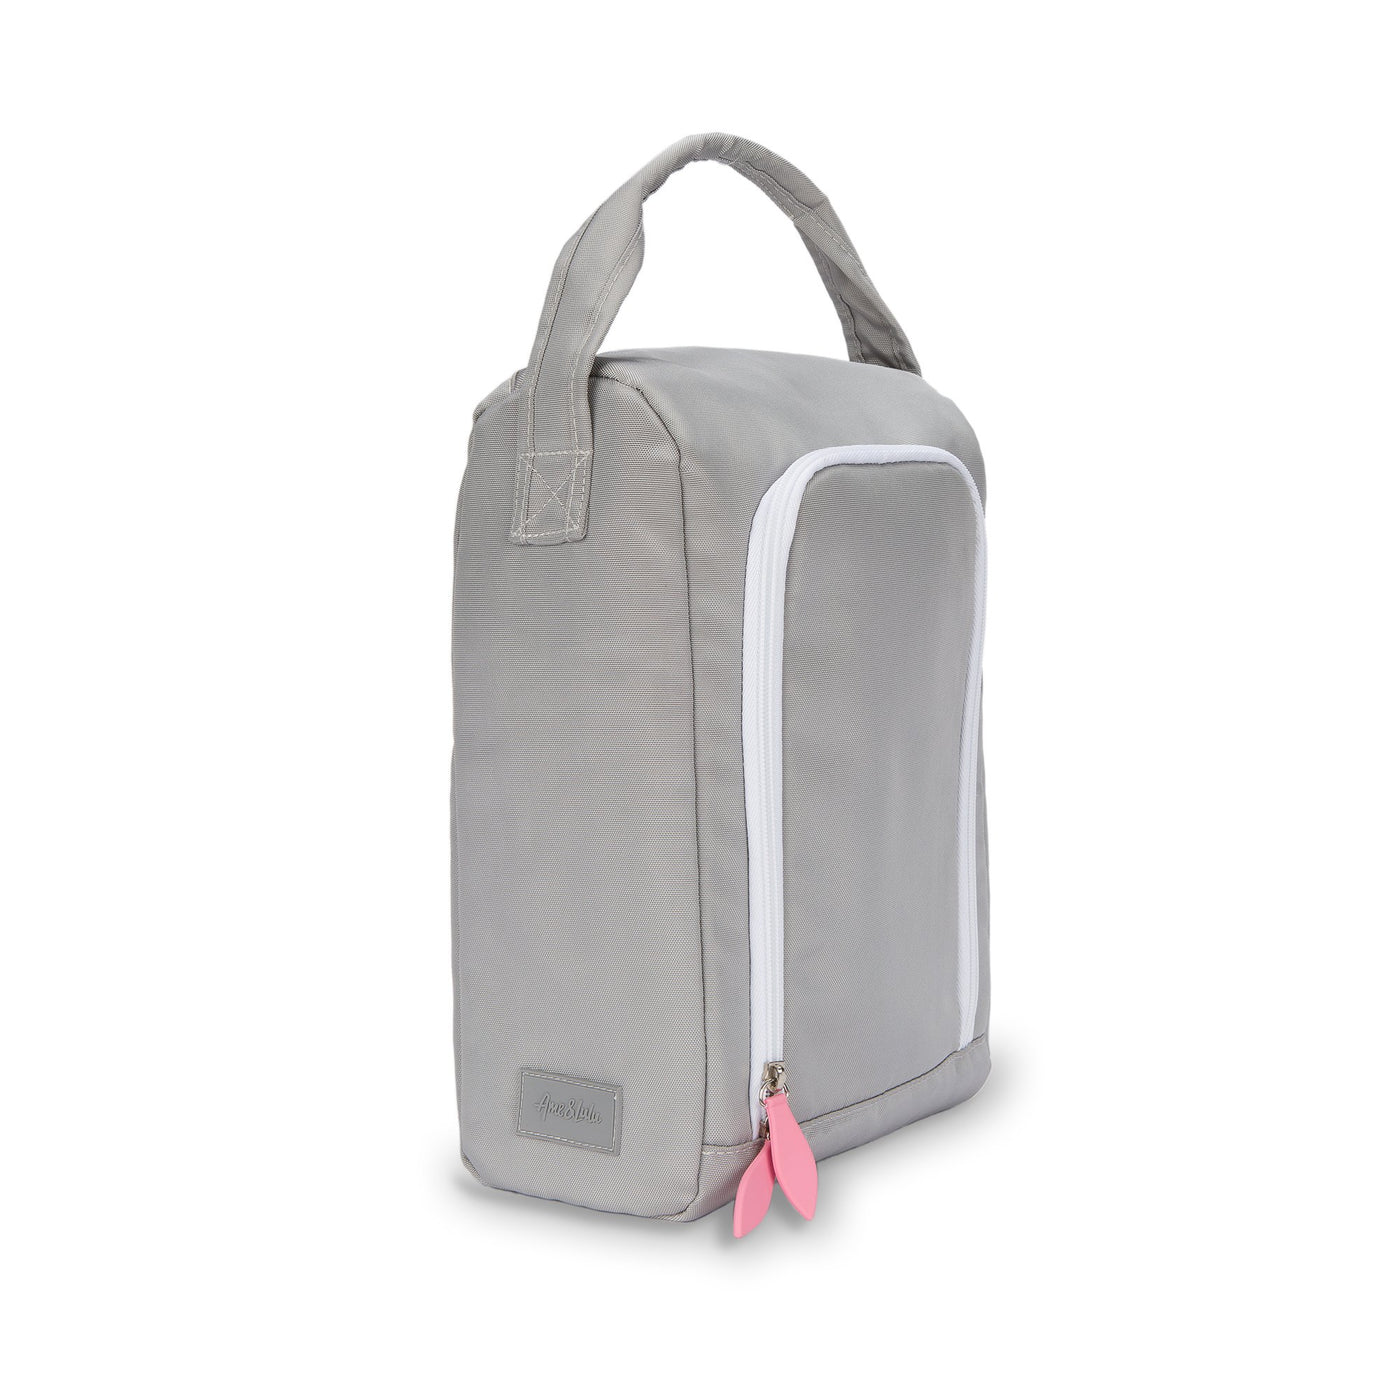 side view of grey shoe bag with pink zippers.